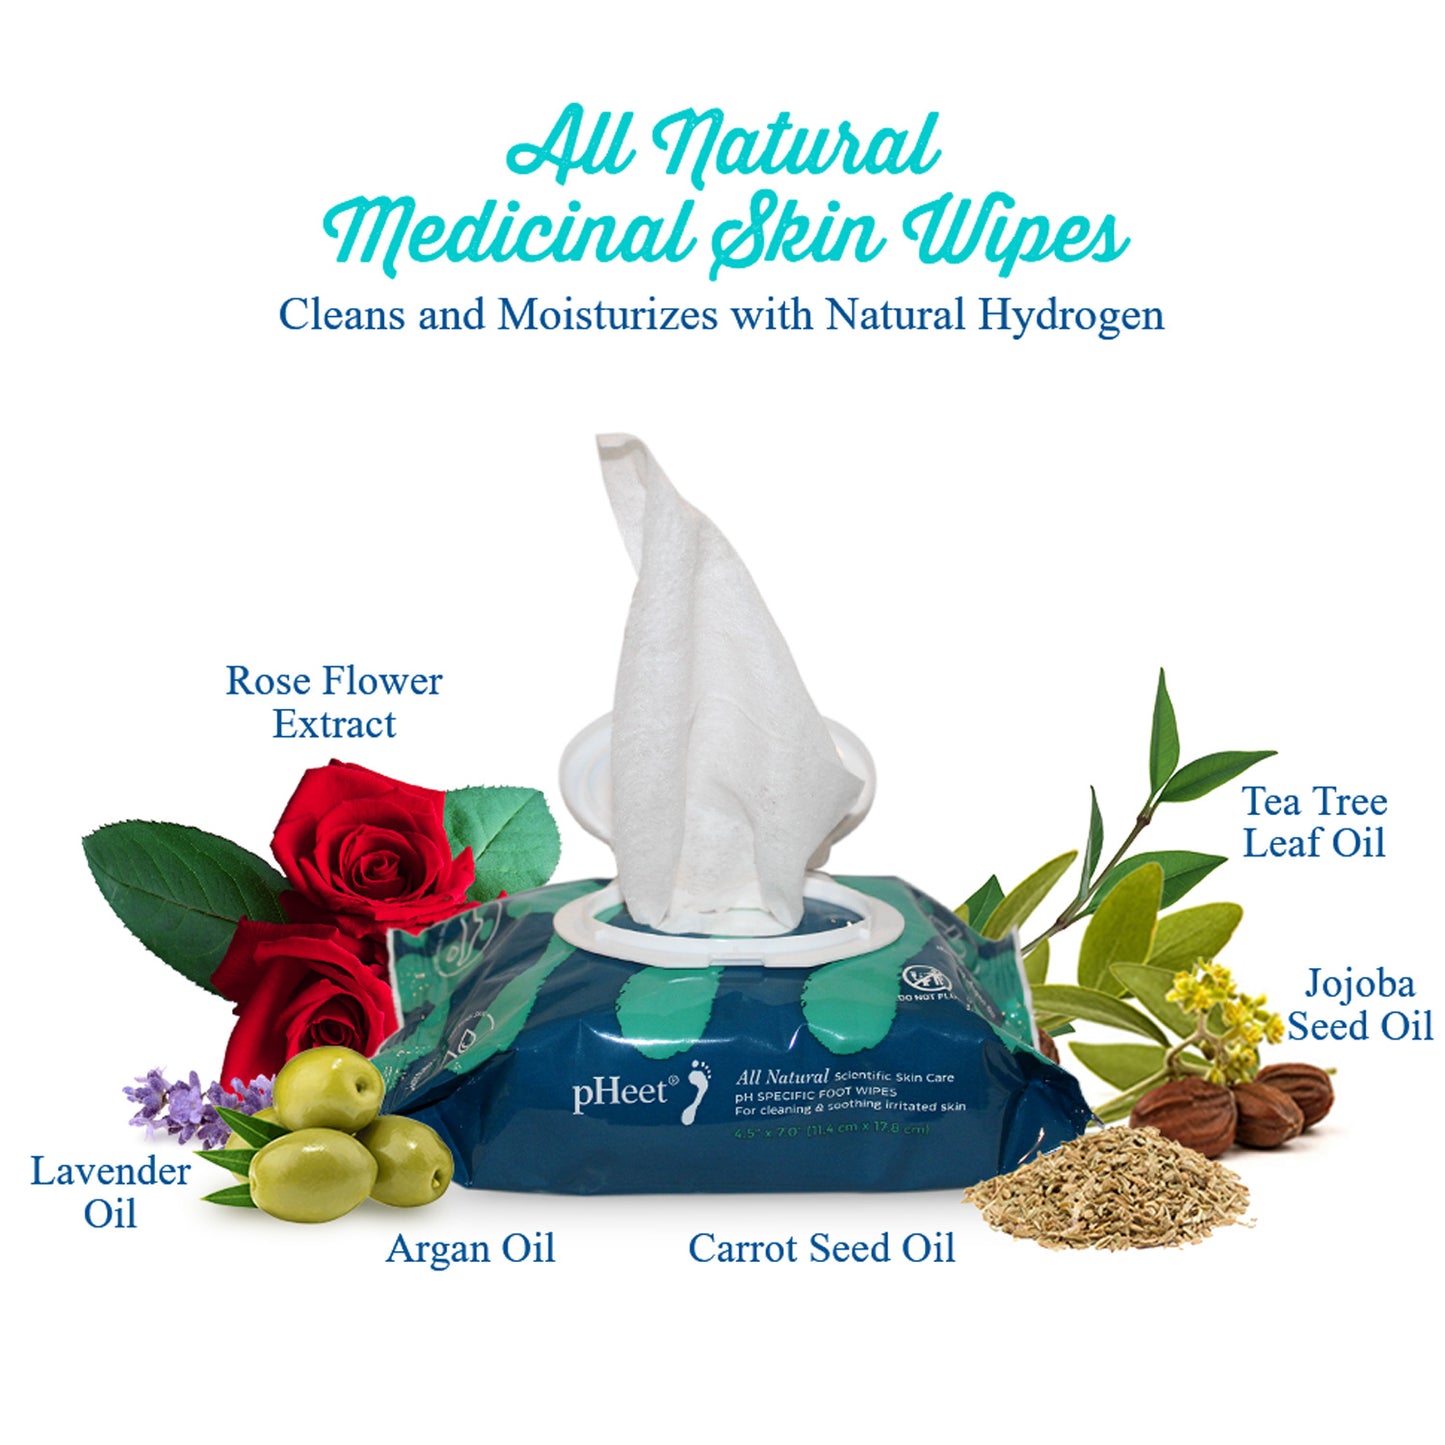 All Natural Medicinal Skin Wipes. Cleans and moistruizes with natural hydrogen. Some ingredients it contains are rose flower extract, lavender oil, argan oil, carrot seed oil, tea tree leaf oil and jojoba seed oil.